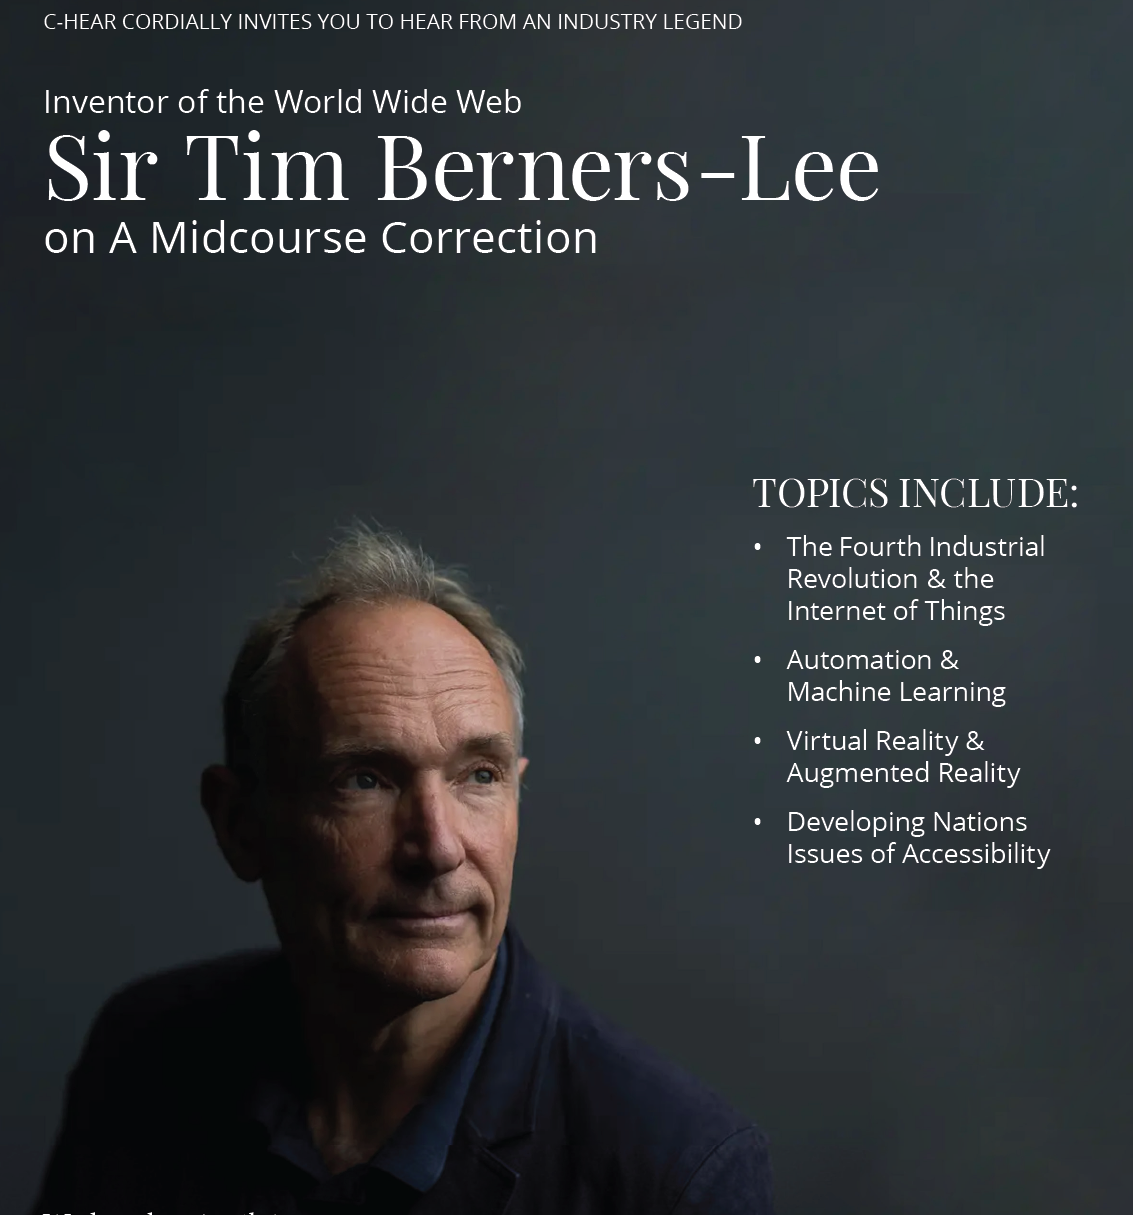 A Midcourse Correction for the Web with Sir Tim Berners-Lee